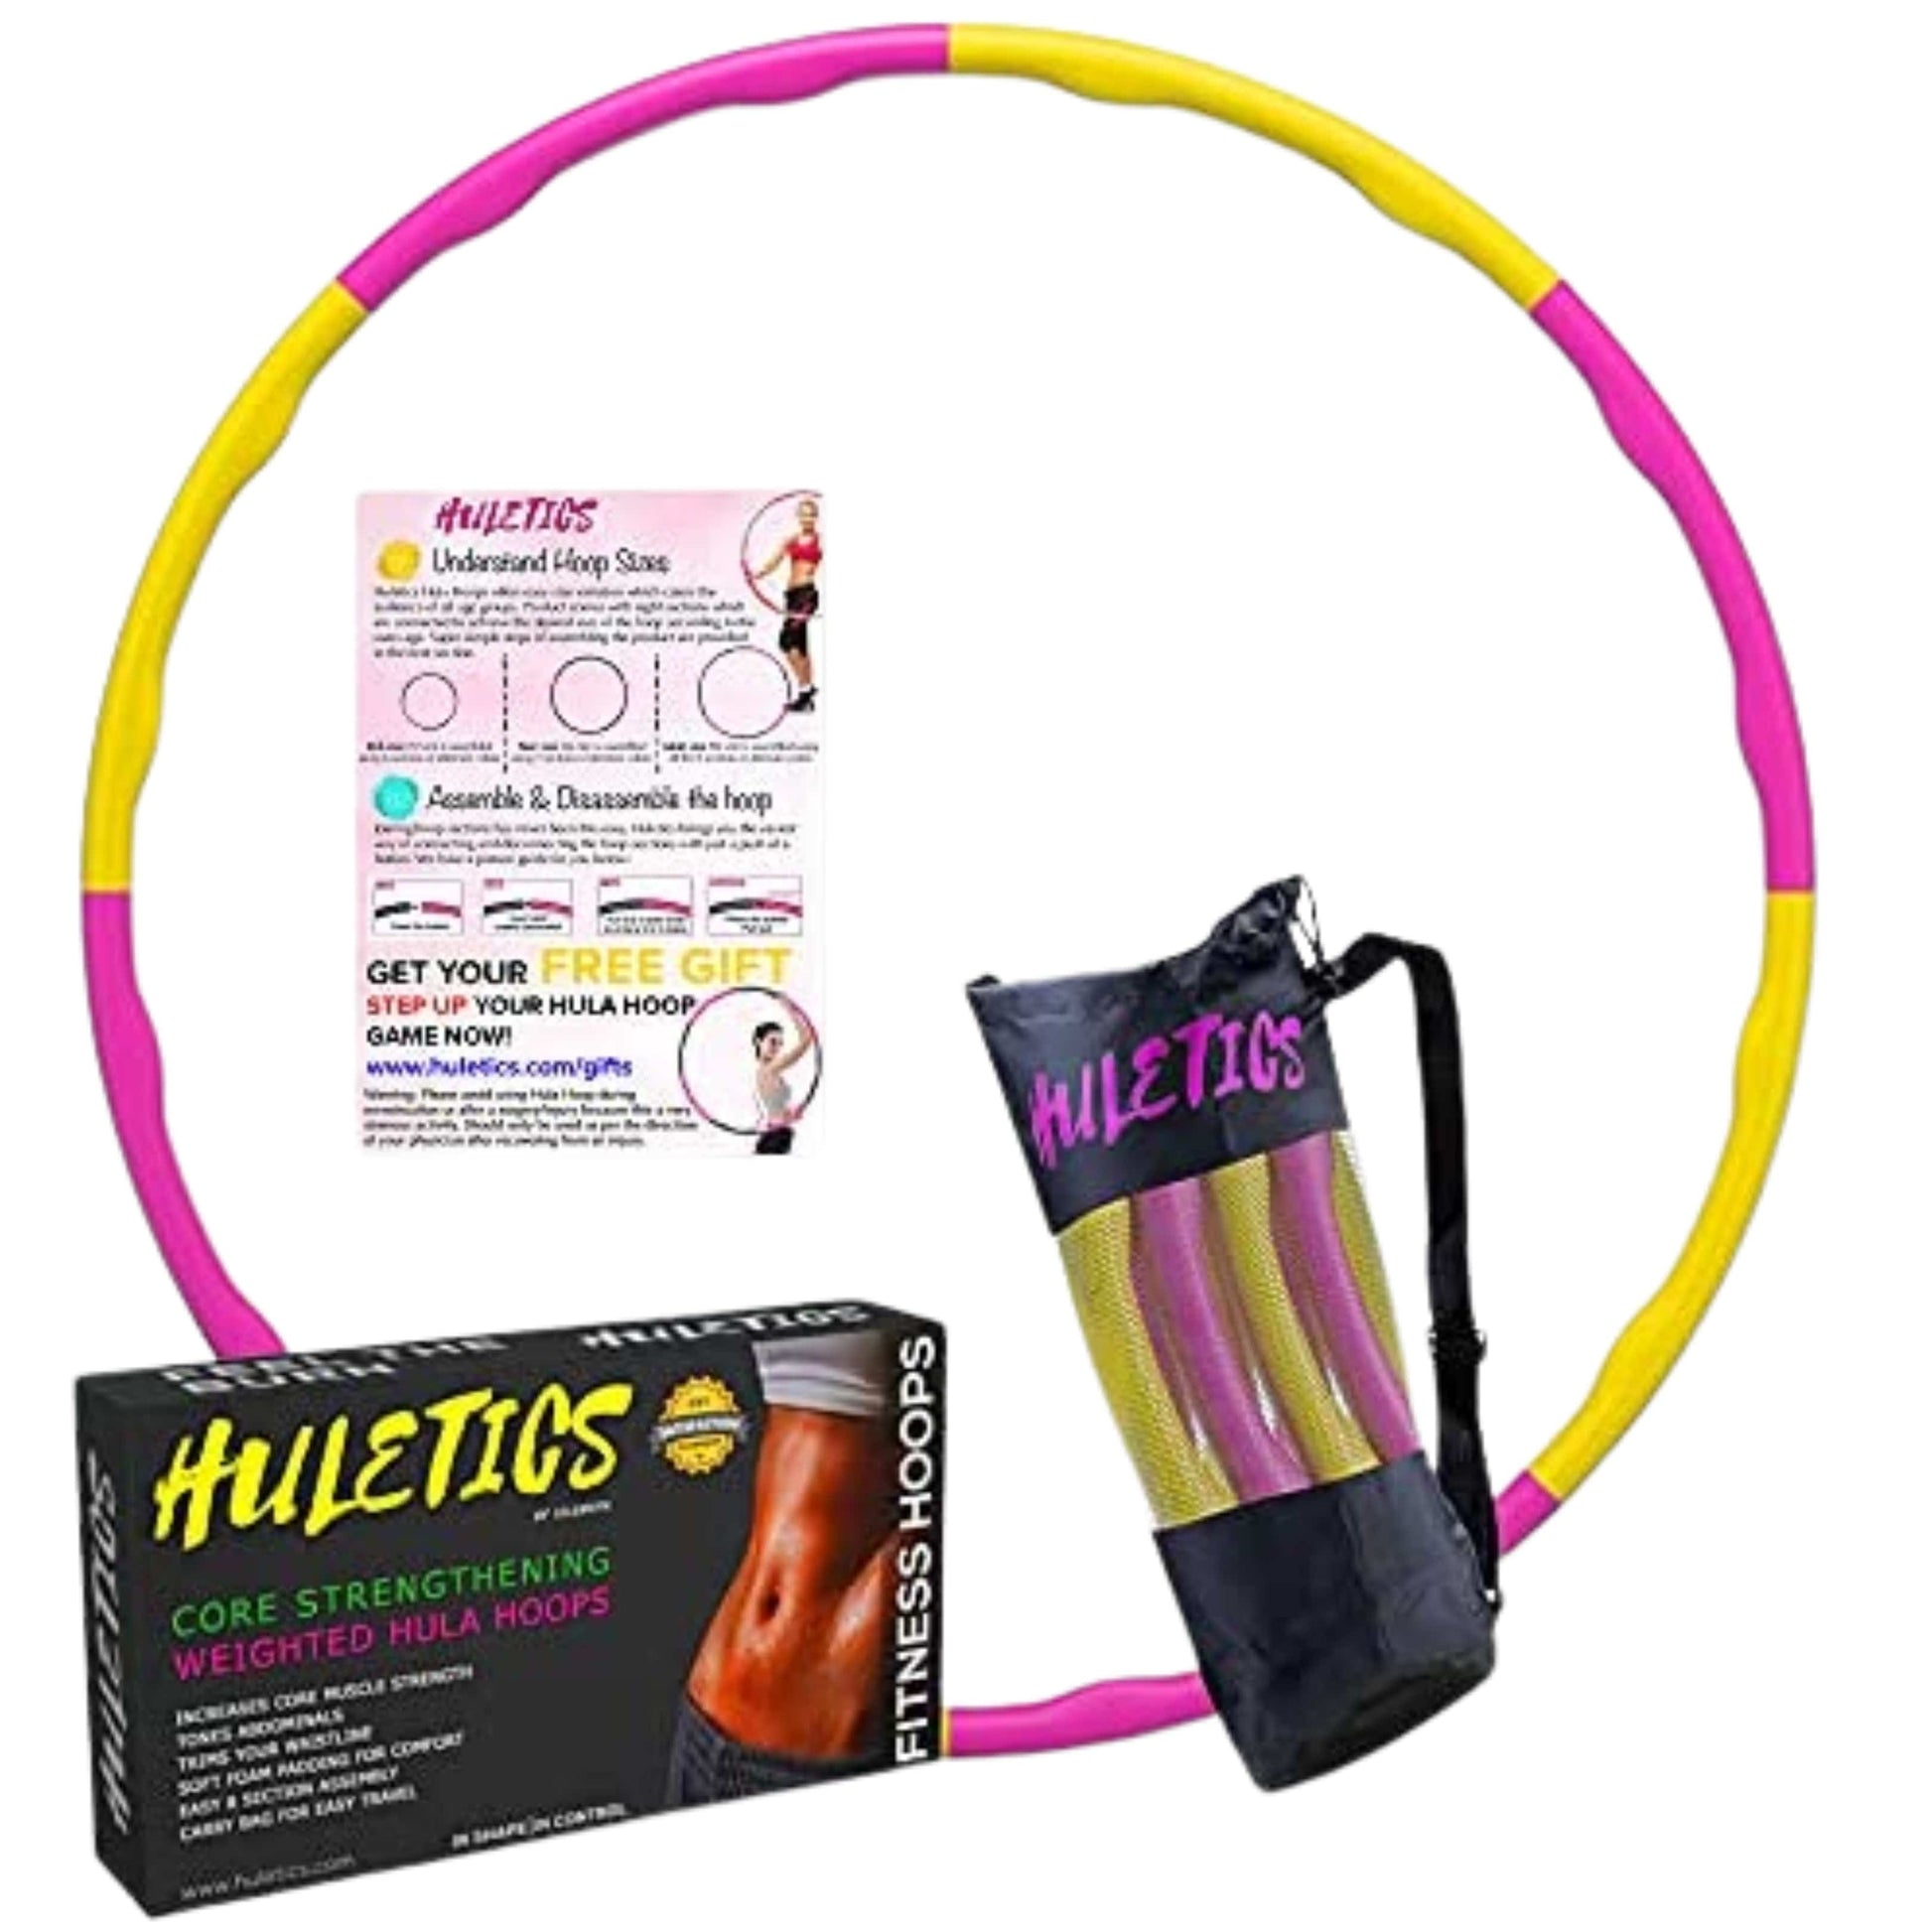 HULETICS Sports Tools HULETICS - Hula Hoop for Fun and Exciting Workout and Fitness Sessions